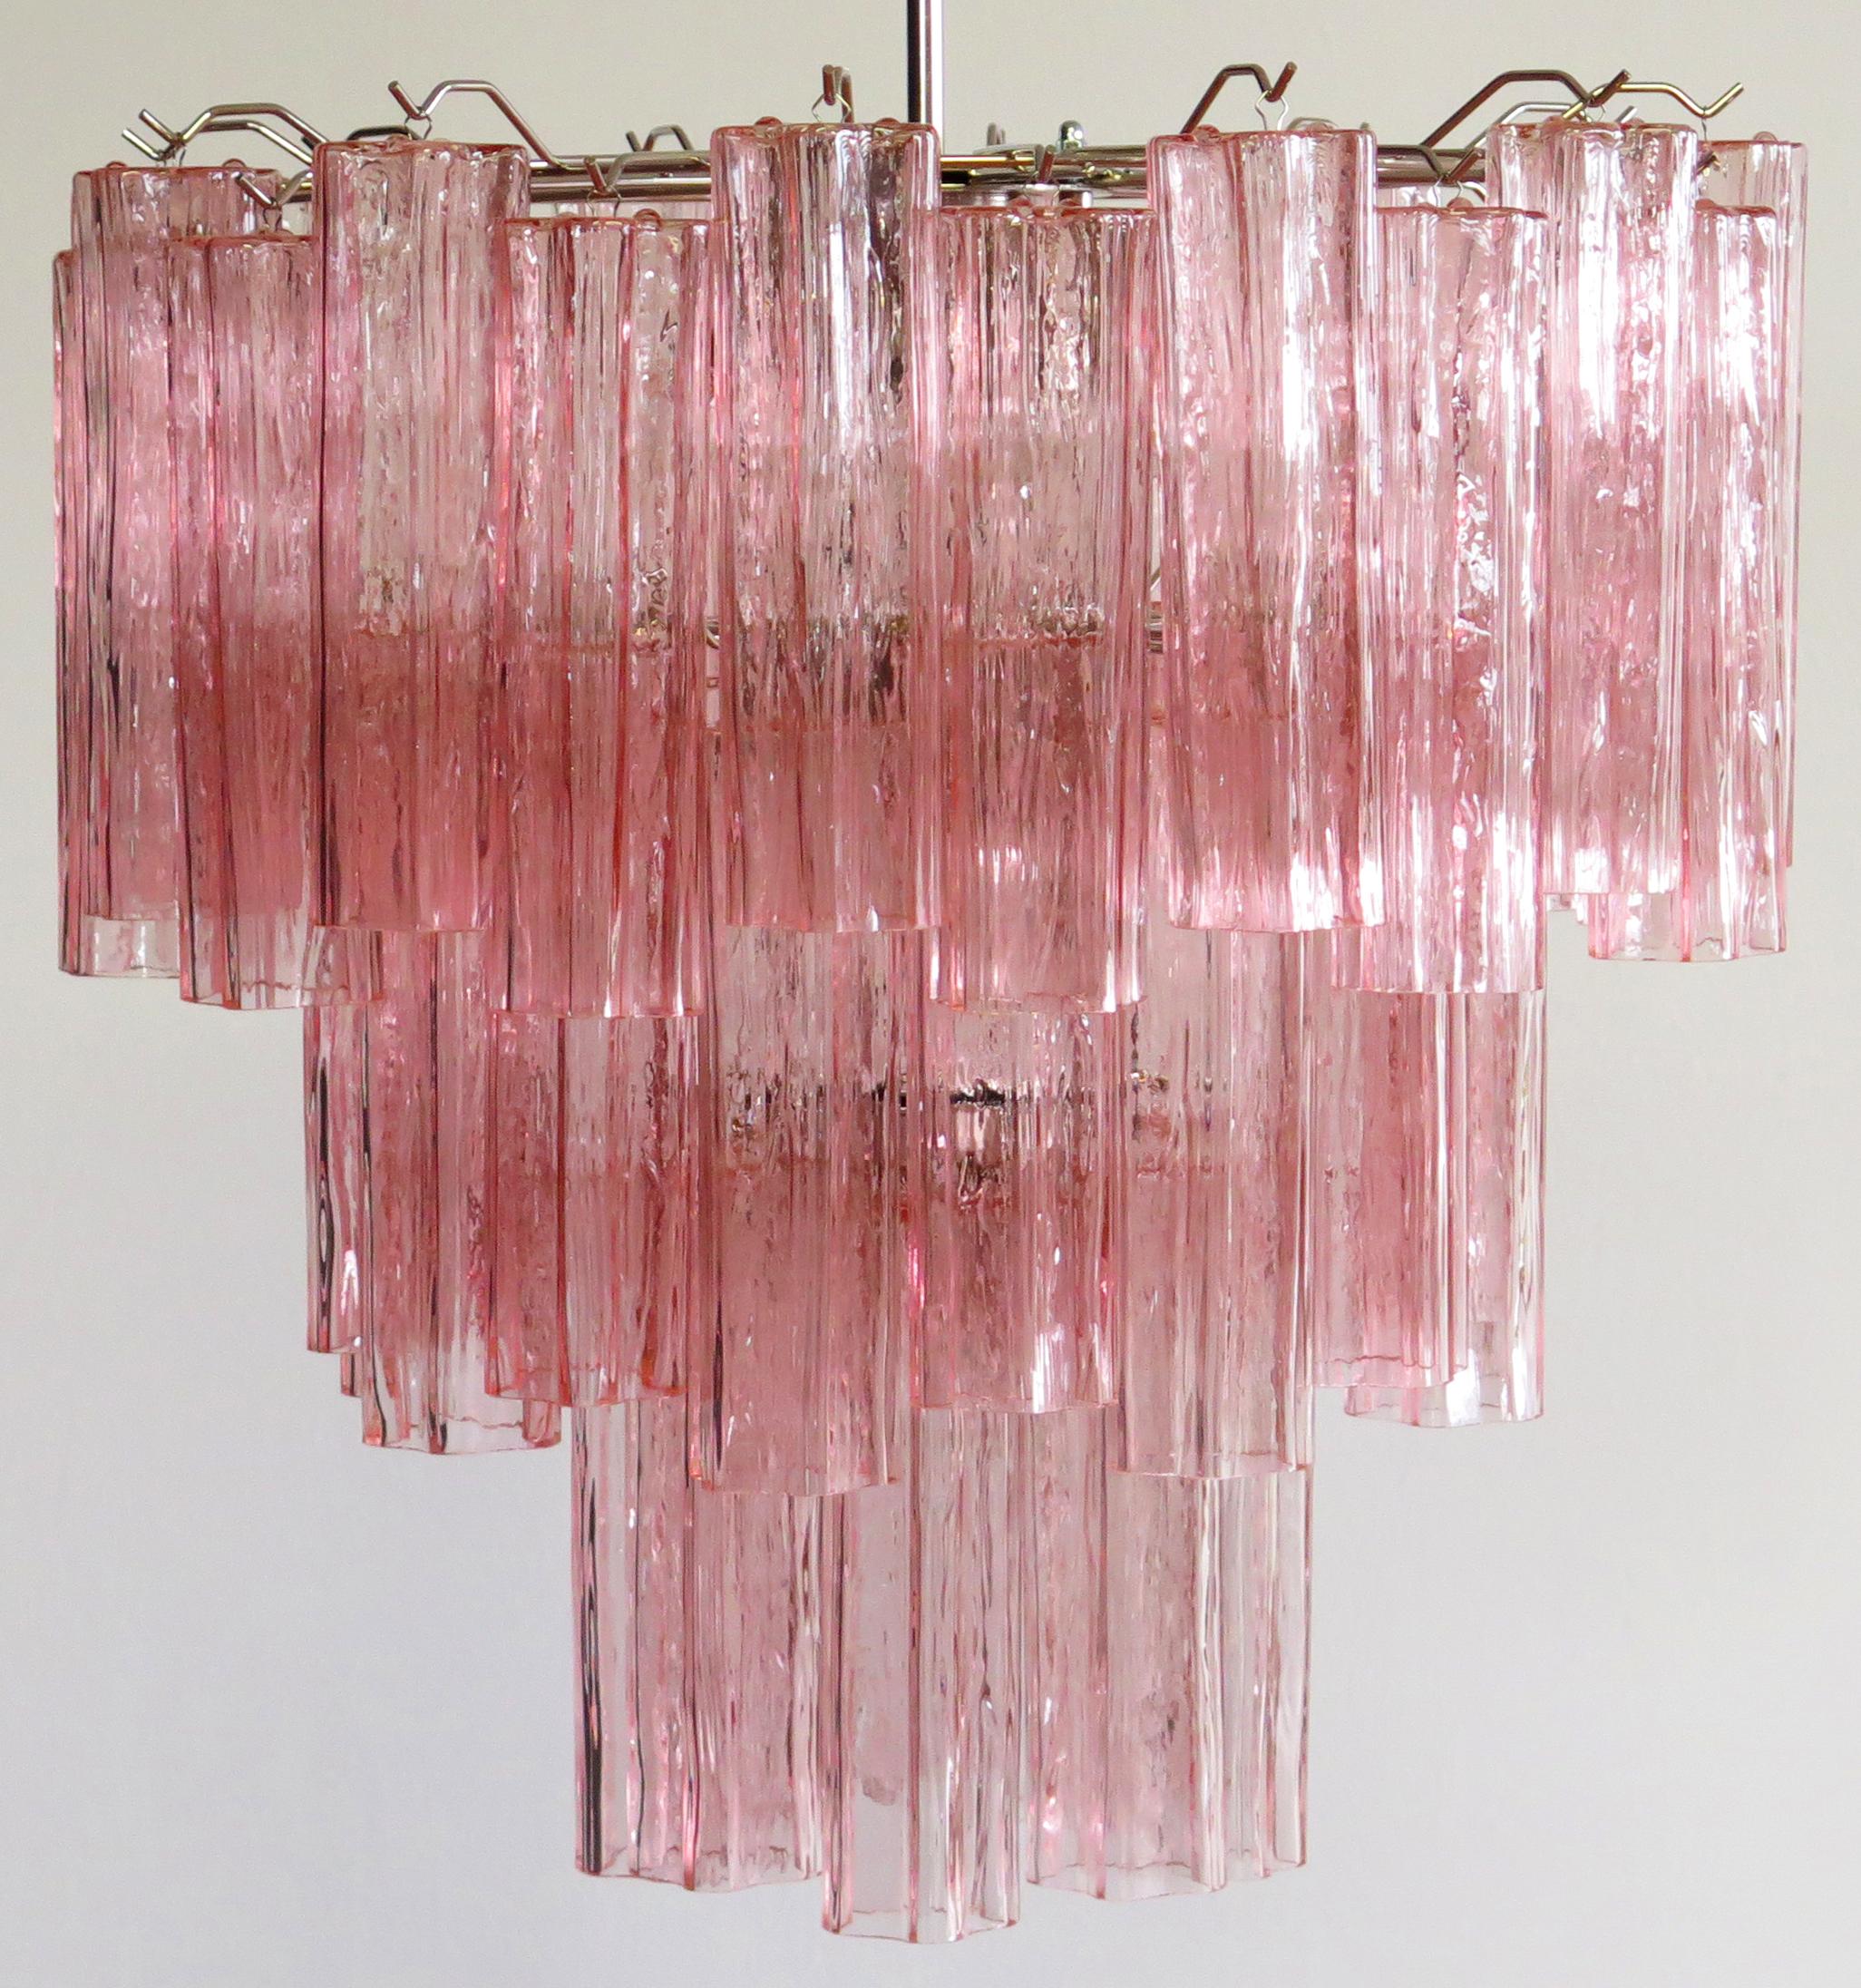 Three-tier Murano glass tube chandelier - 48 pink glasses - Mid-Century Modern
Italian vintage chandelier in Murano glass and nickel-plated metal structure. The armor polished nickel supports 48 large pink glass tubes in a star shape. The glasses